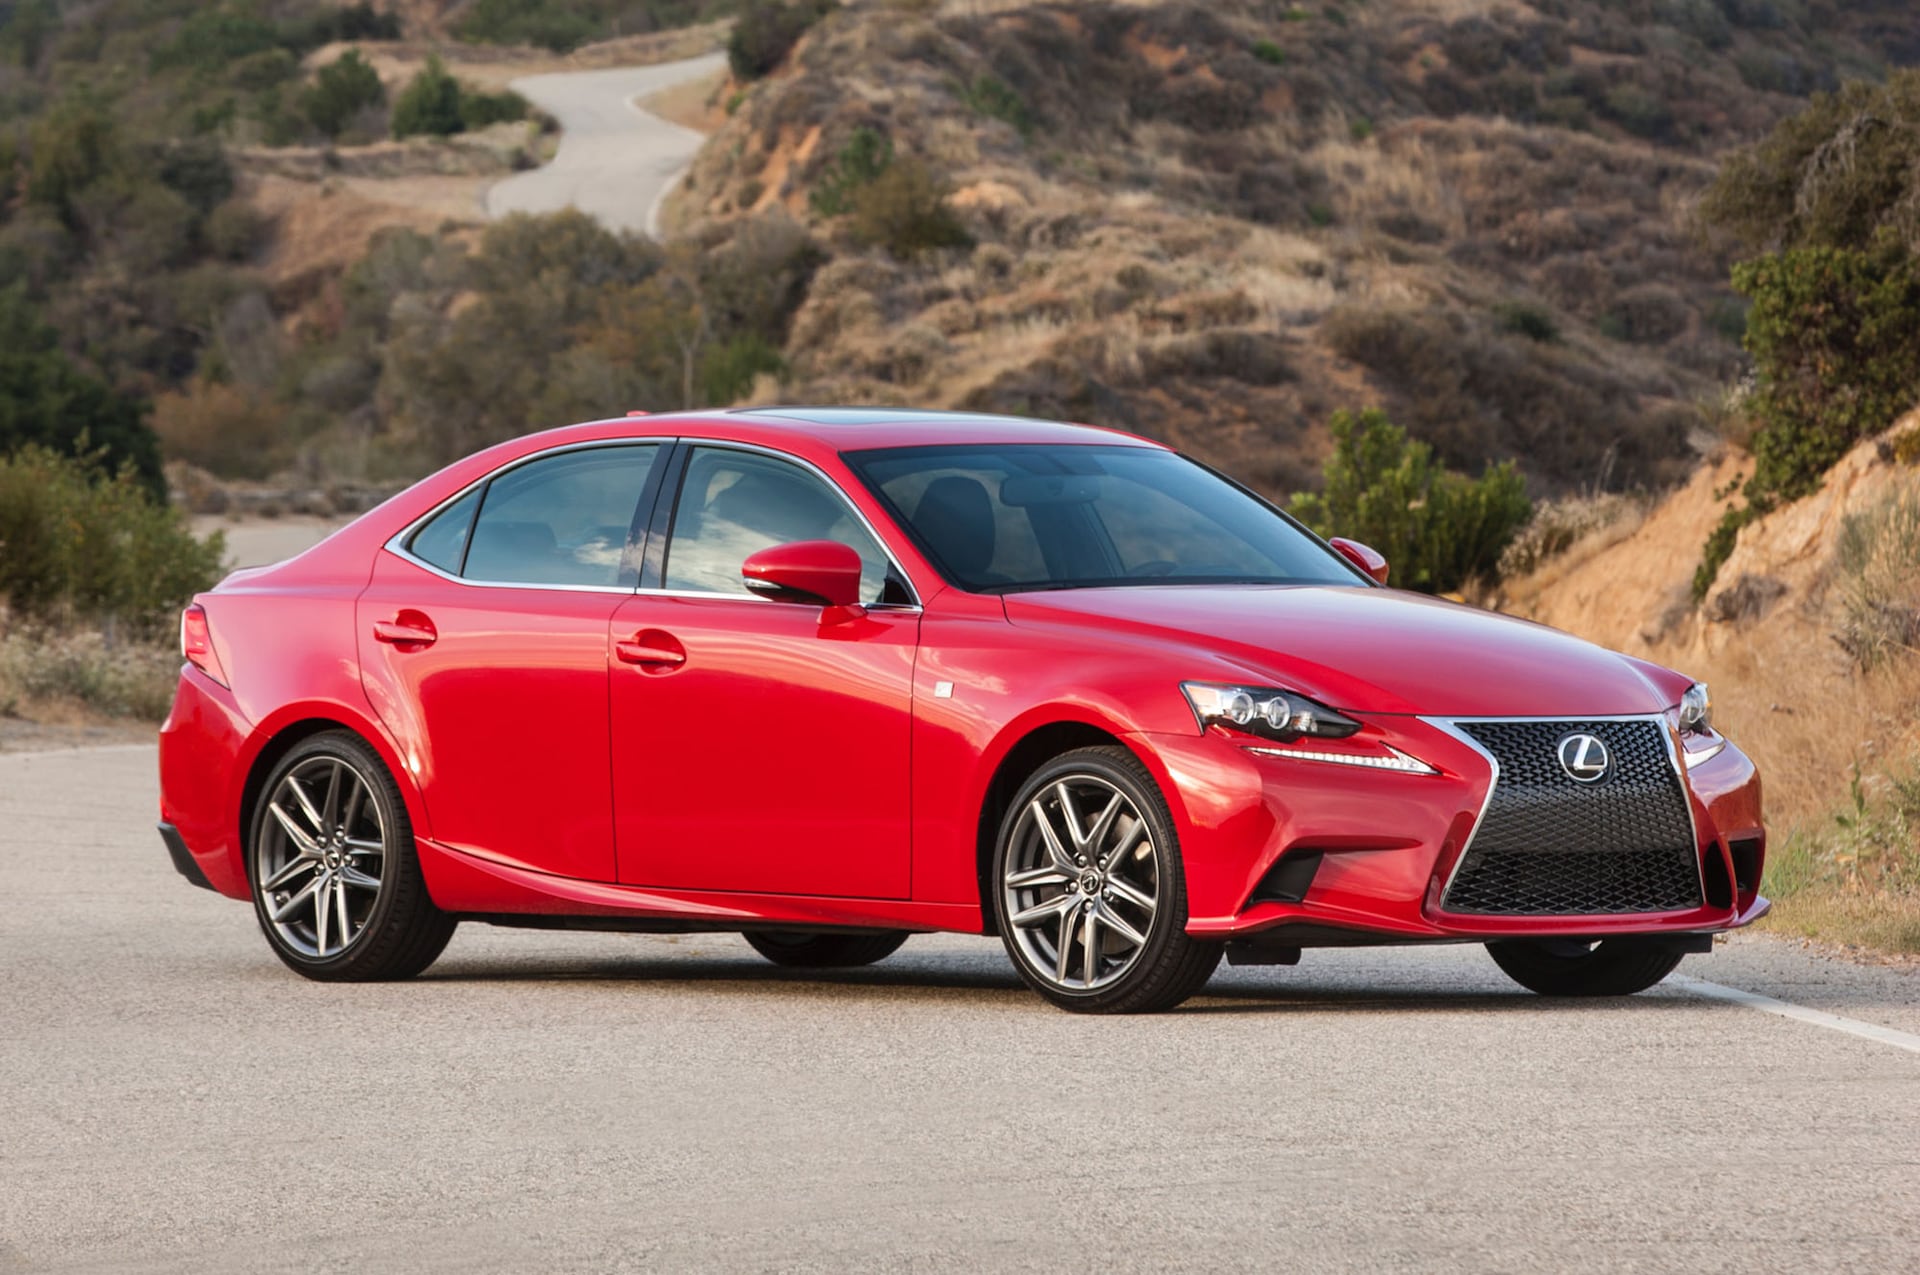 2016 Lexus IS 200t EPA-Rated at 22/33 MPG